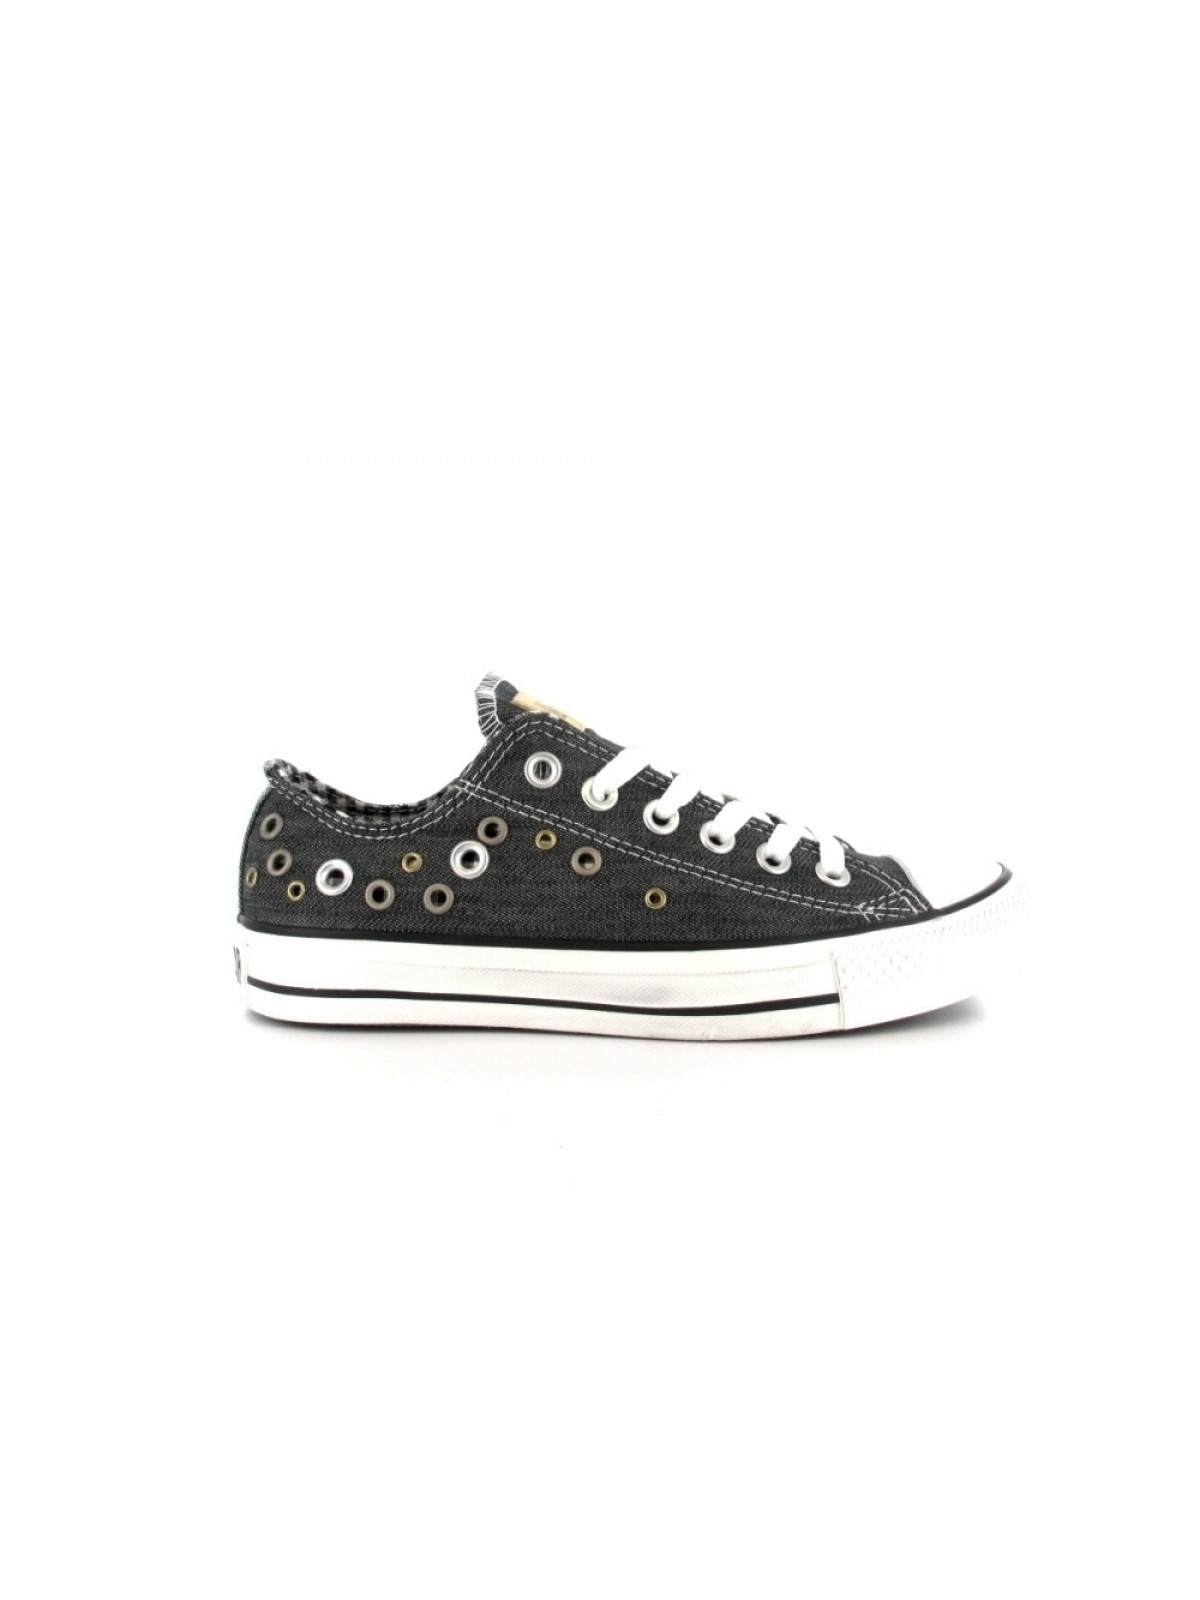 converse all star basse soldes